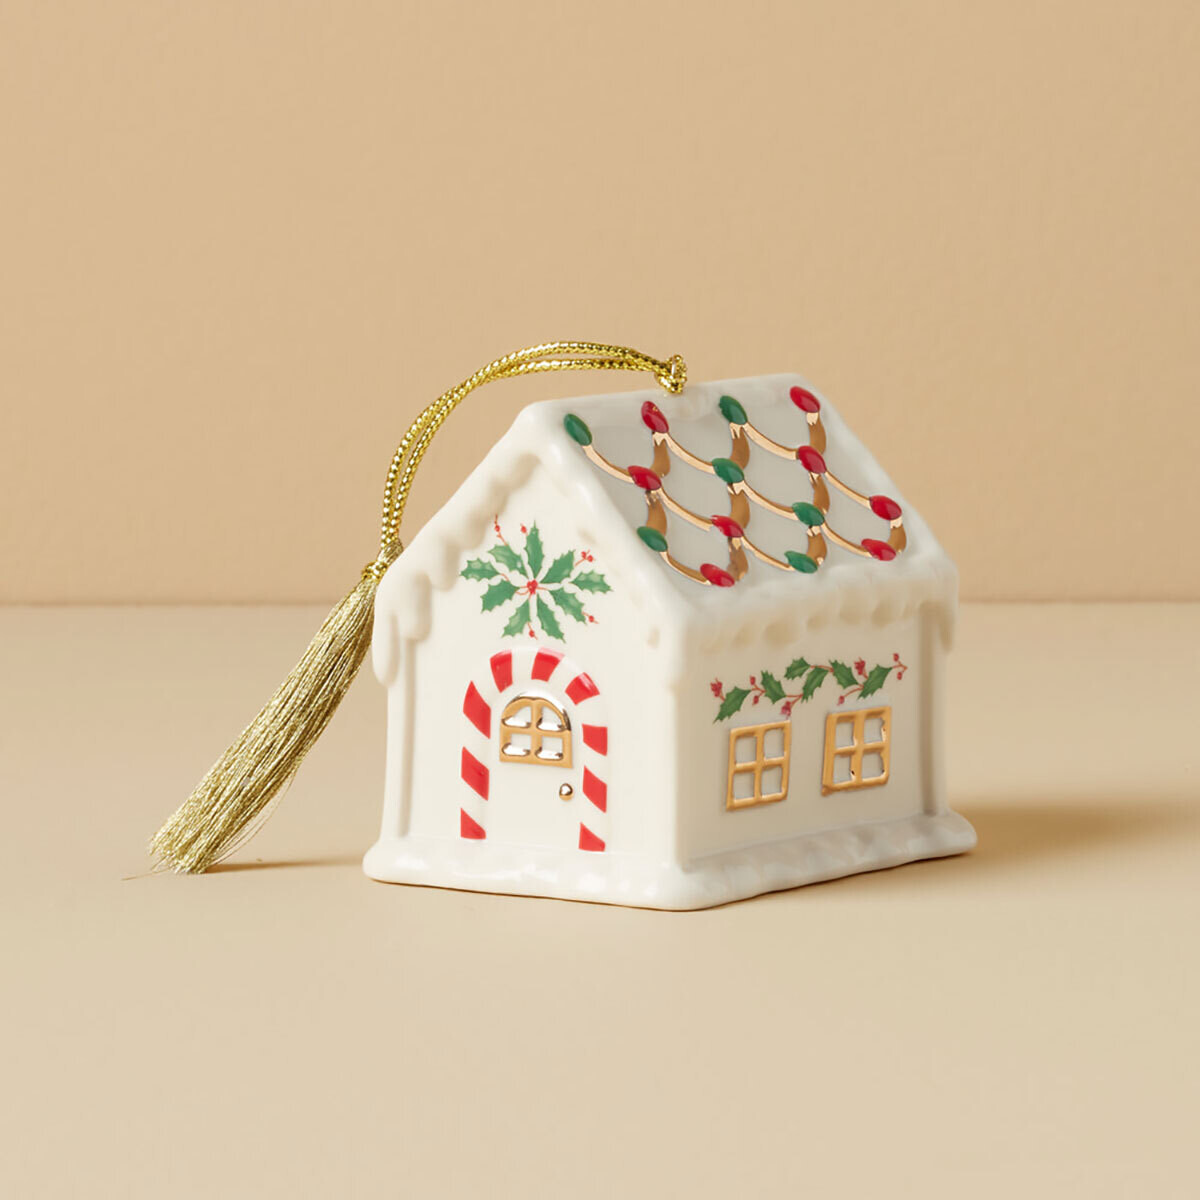 Lenox Holiday Accent Gingerbread House Ornament 896108